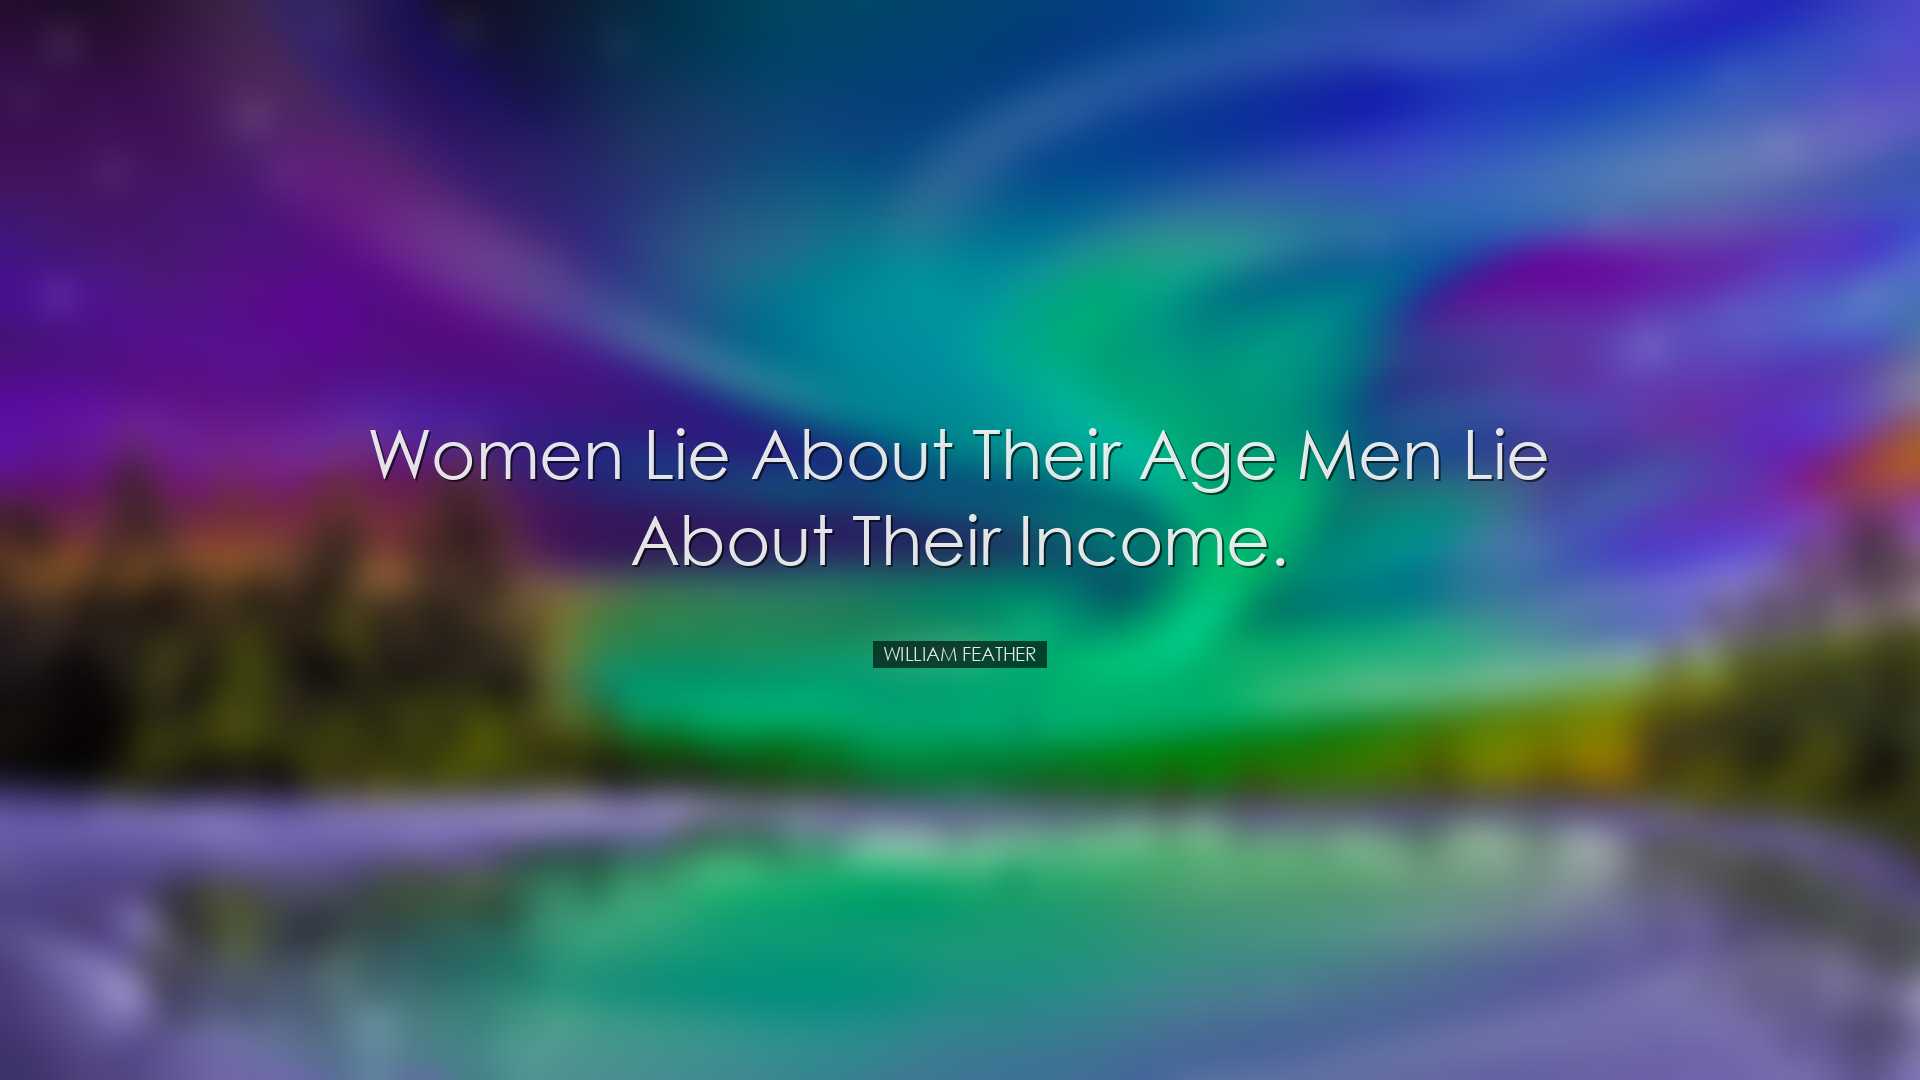 Women lie about their age men lie about their income. - William Fe